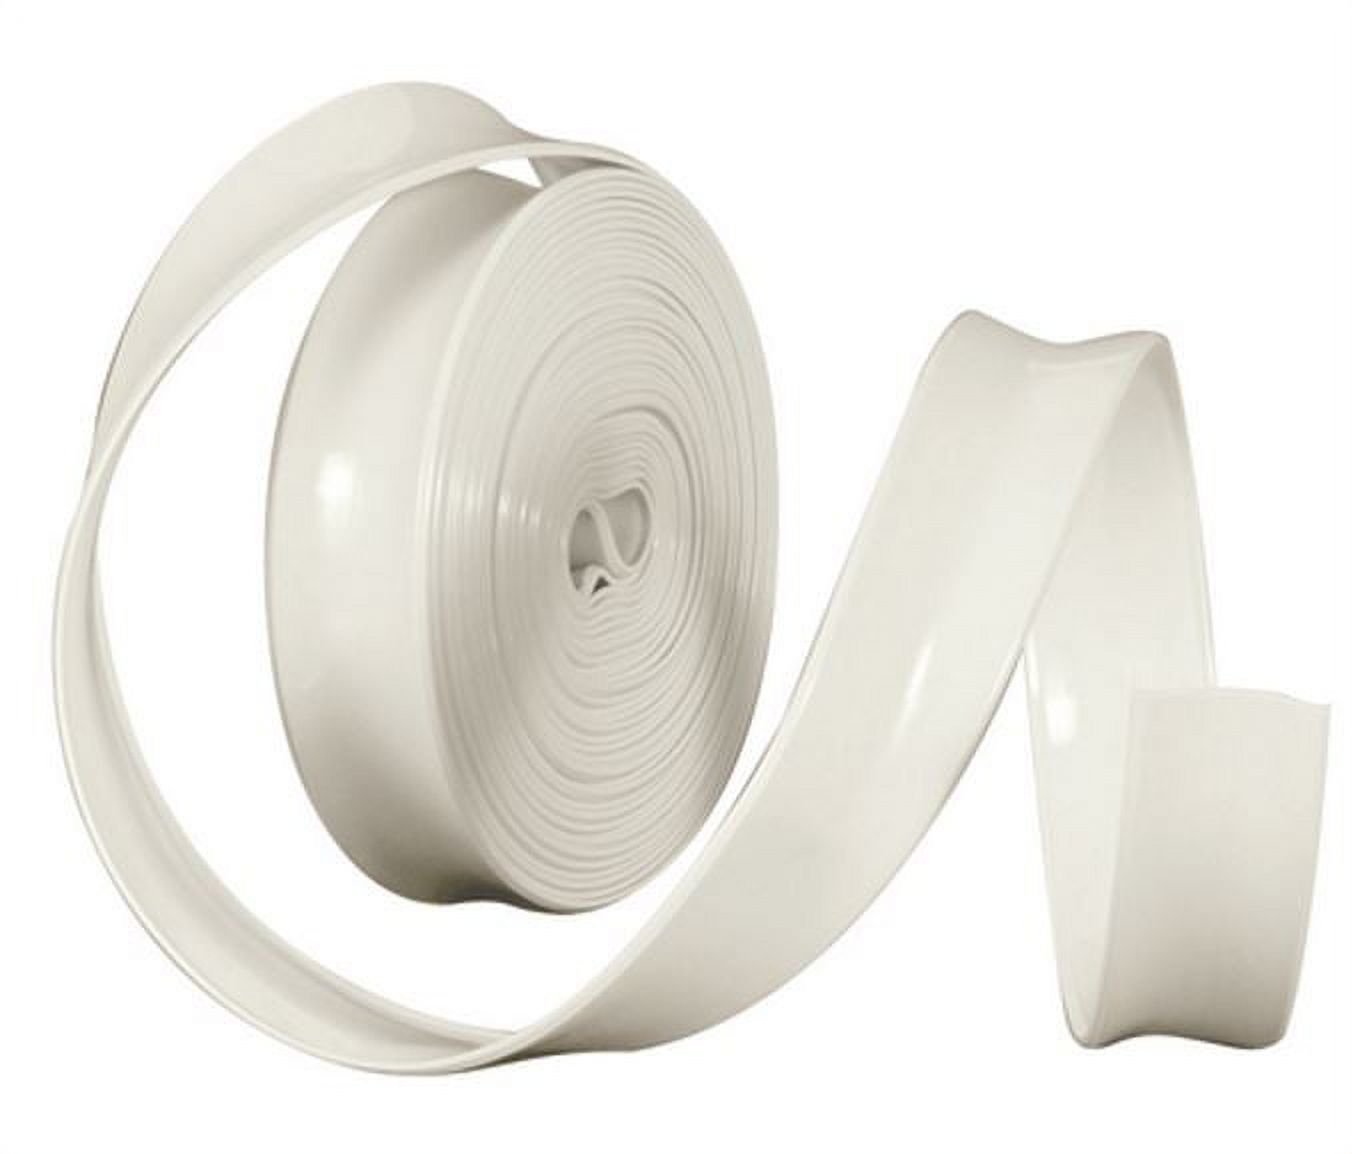 Camco 25222 - Colonial White Vinyl Trim Insert - image 2 of 7